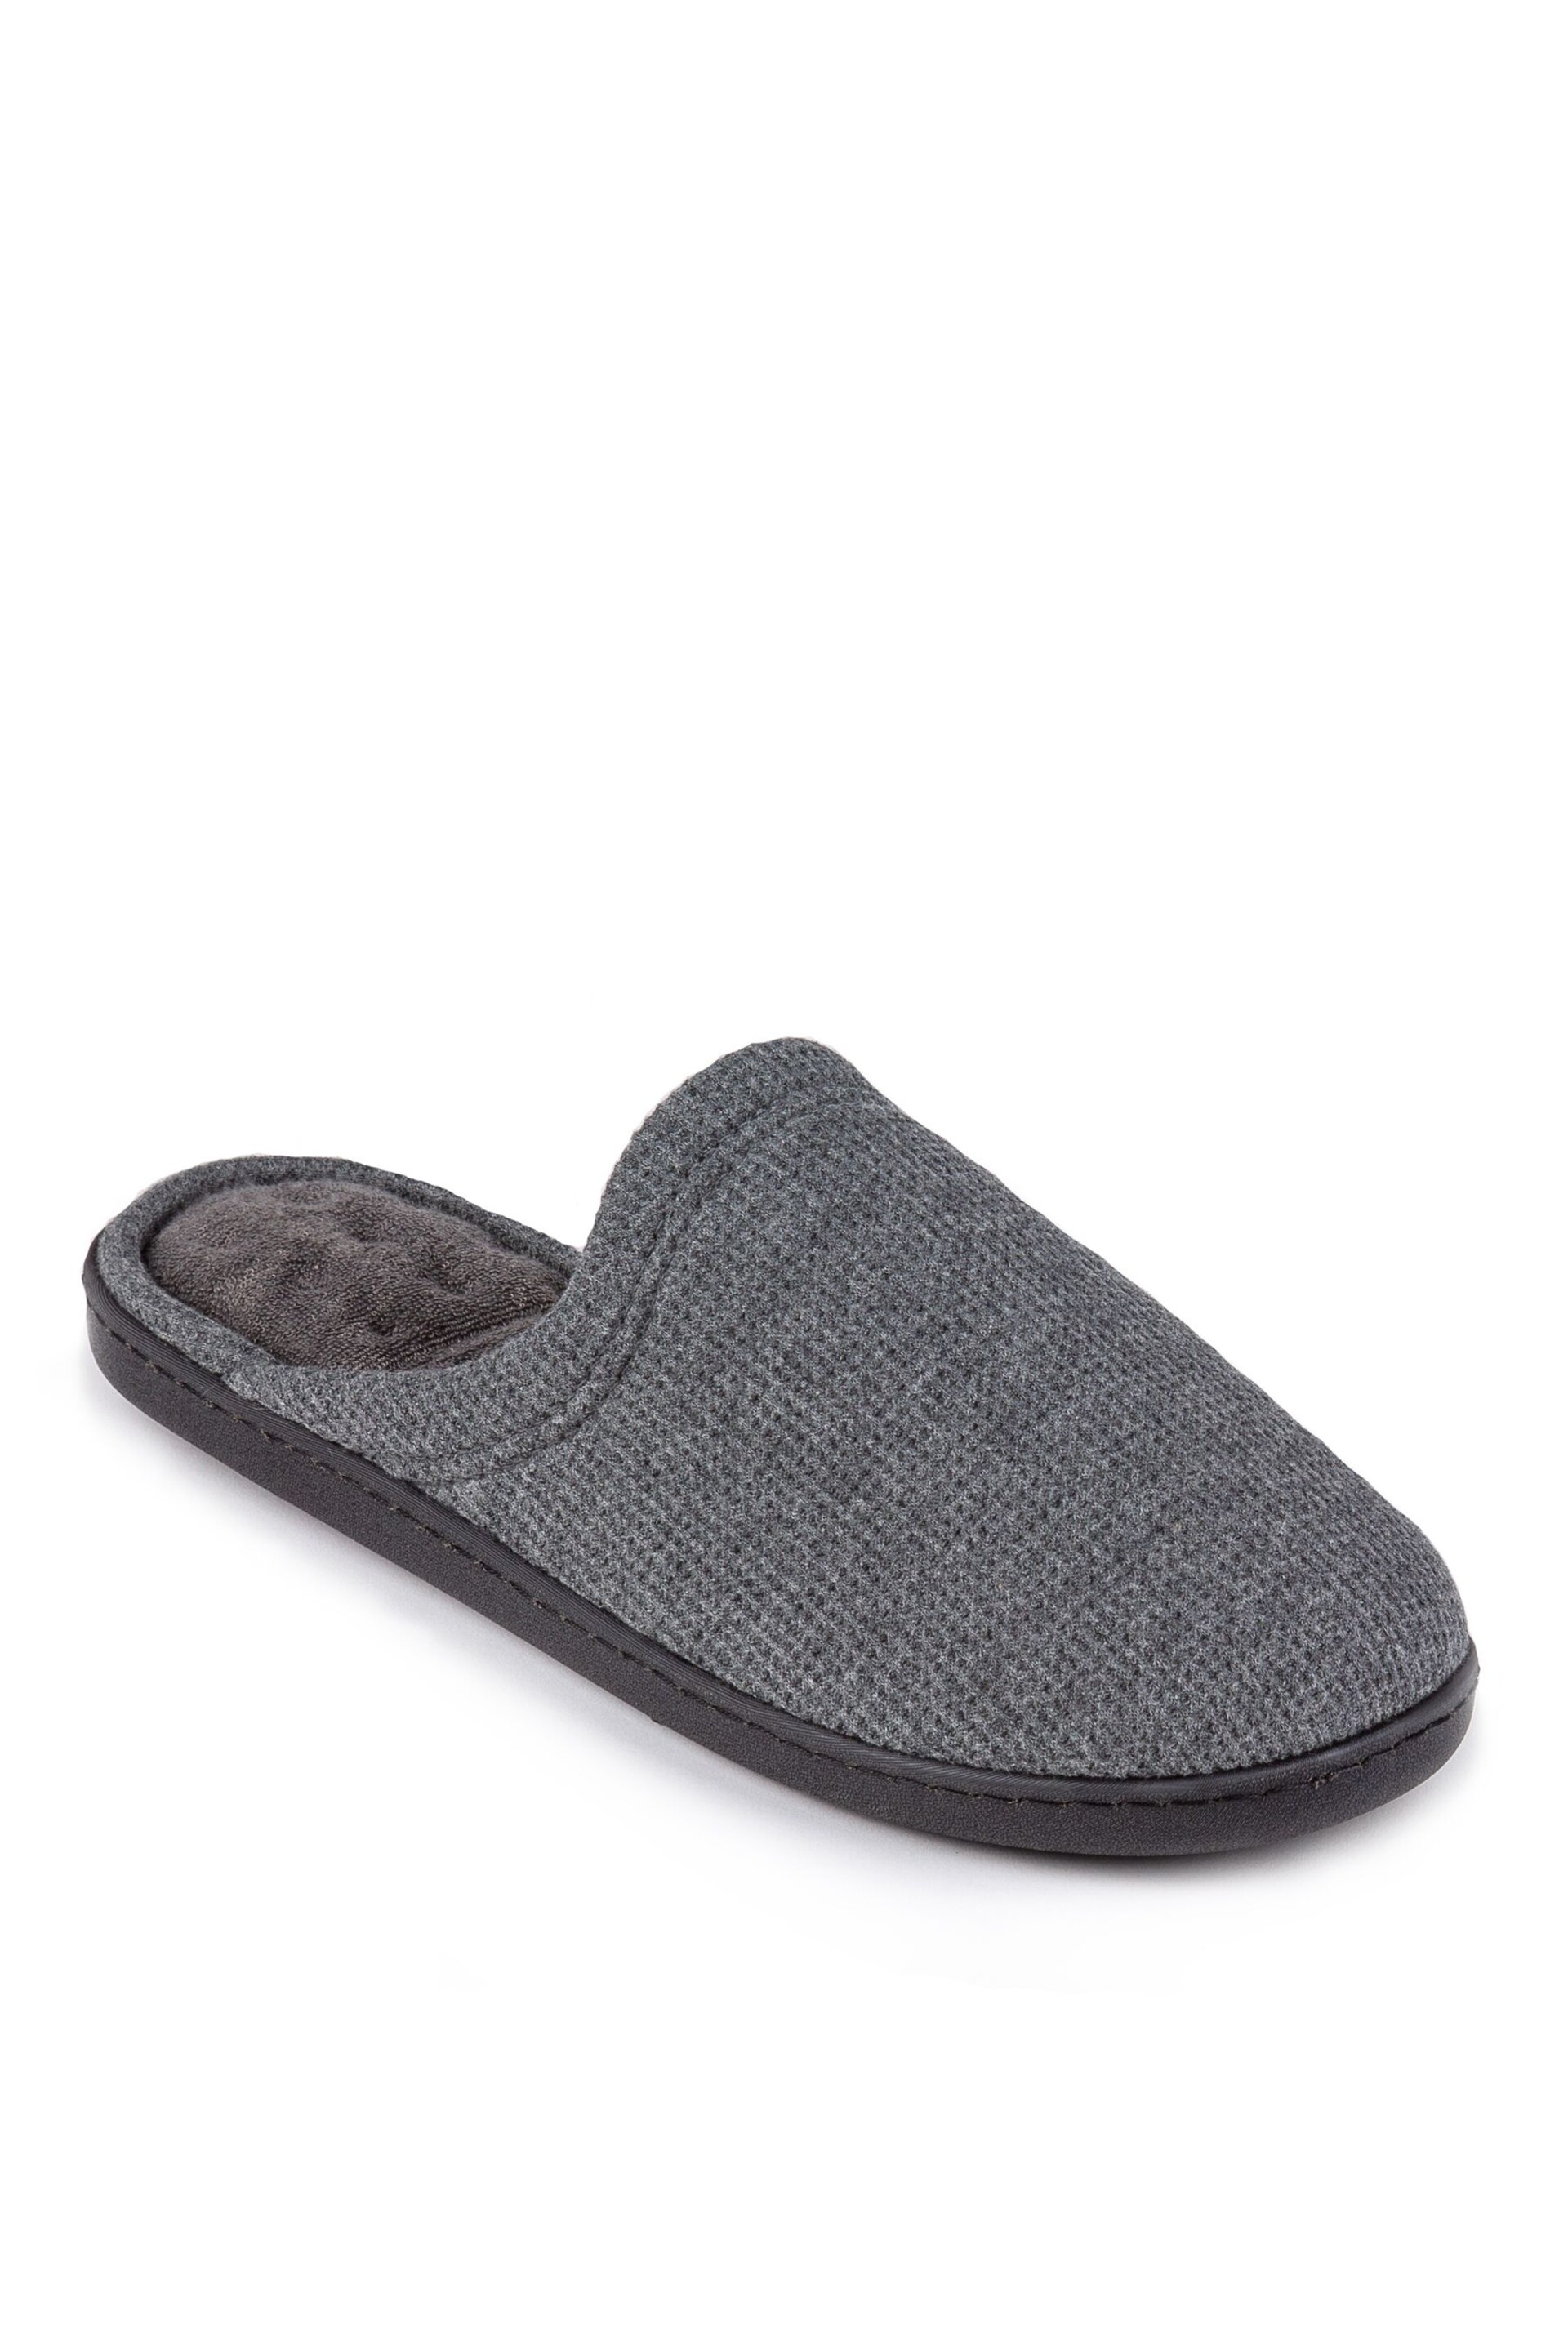 Totes Grey Mens Waffle Mule Slippers - Image 3 of 5